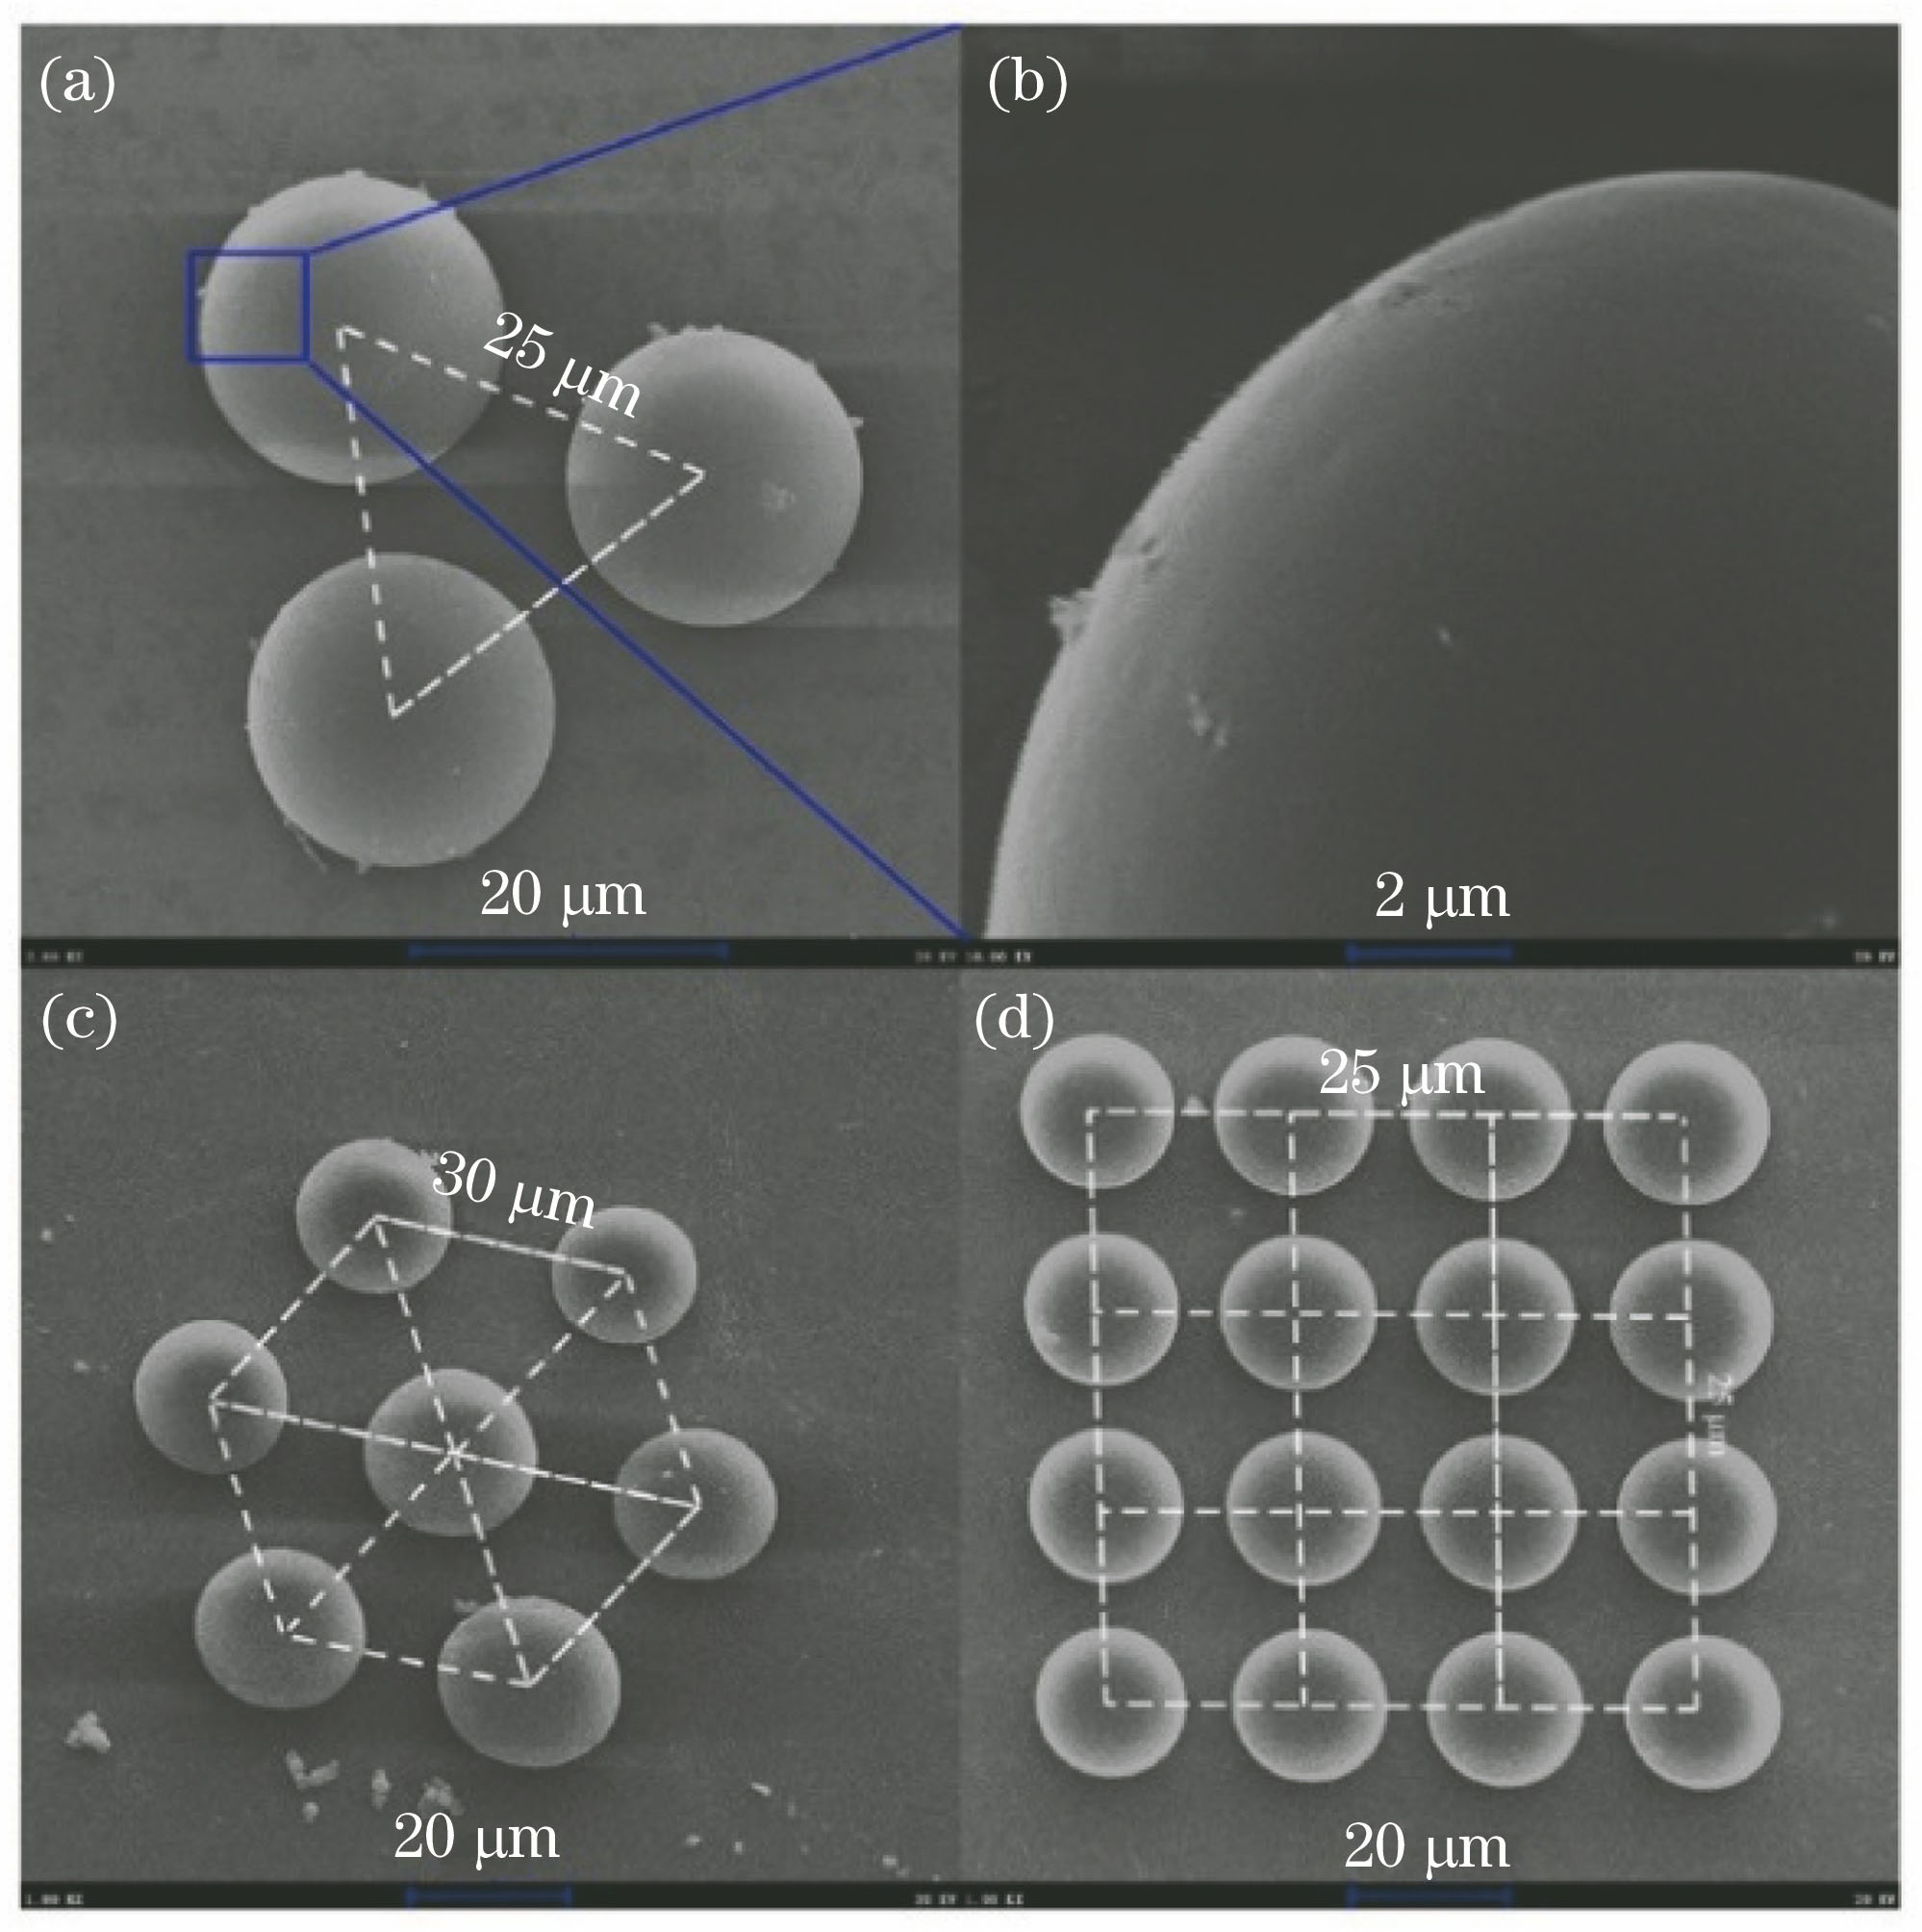 SEM images of microlens arrays fabricated by multiple foci[1]. (a) Microlens arrays in triangle distribution; (b) partial view of one microlens in Fig. (a) captured at 45°; (c) microlens arrays in hexagonal distribution; (d) microlens arrays in 4×4 distribution